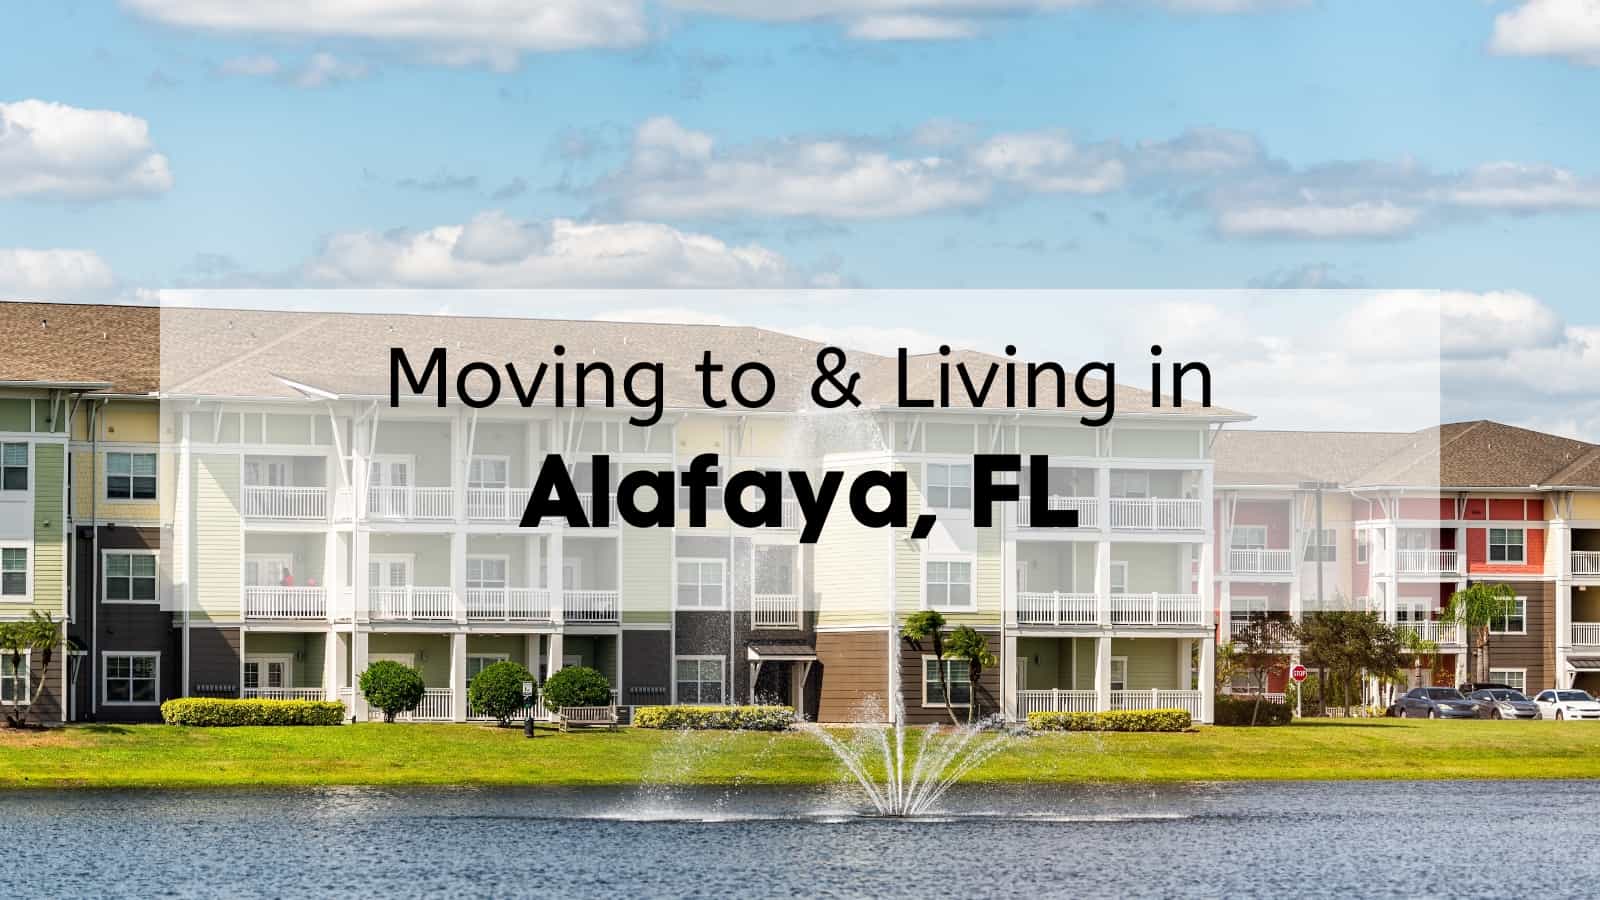 Moving to and living in Alafaya, FL